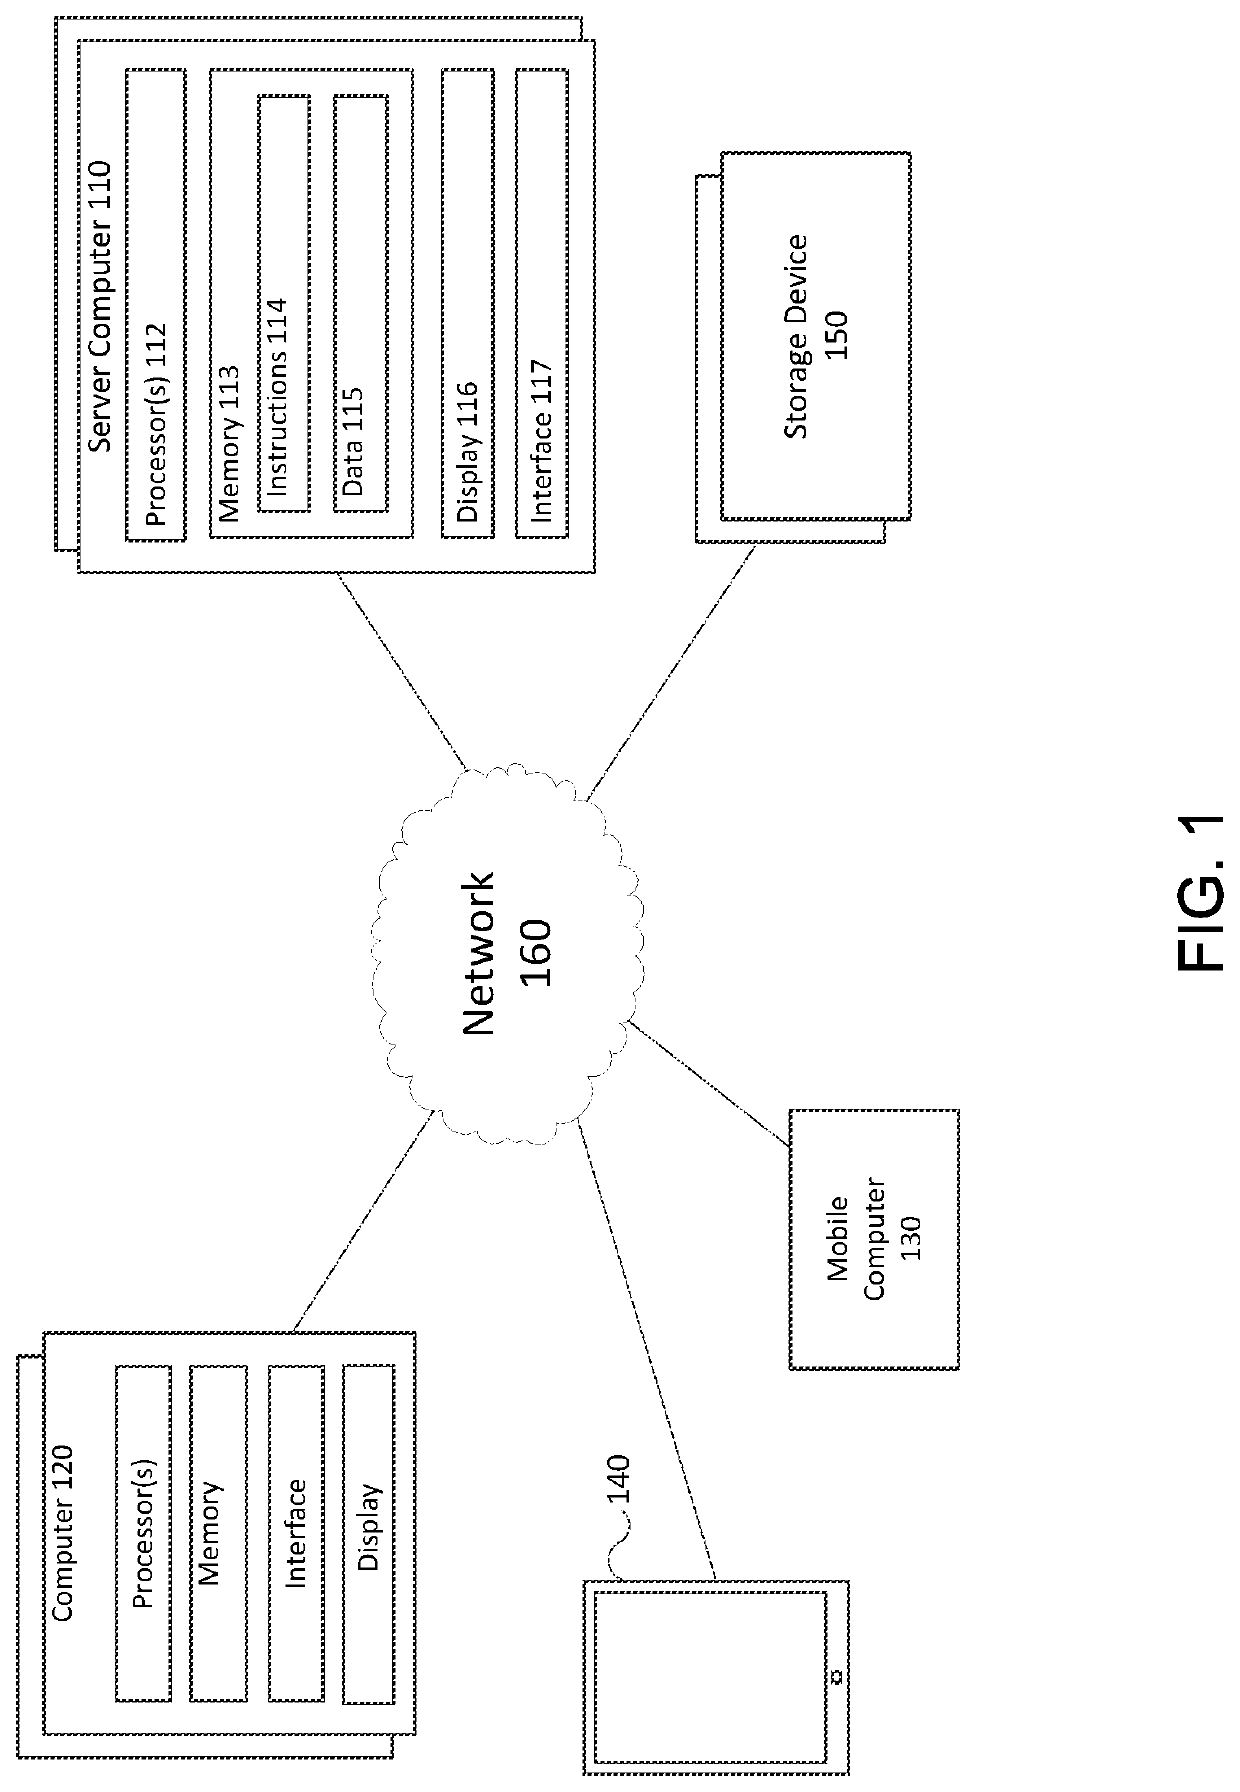 Method and system for calculating and providing initial margin under the standard initial margin model